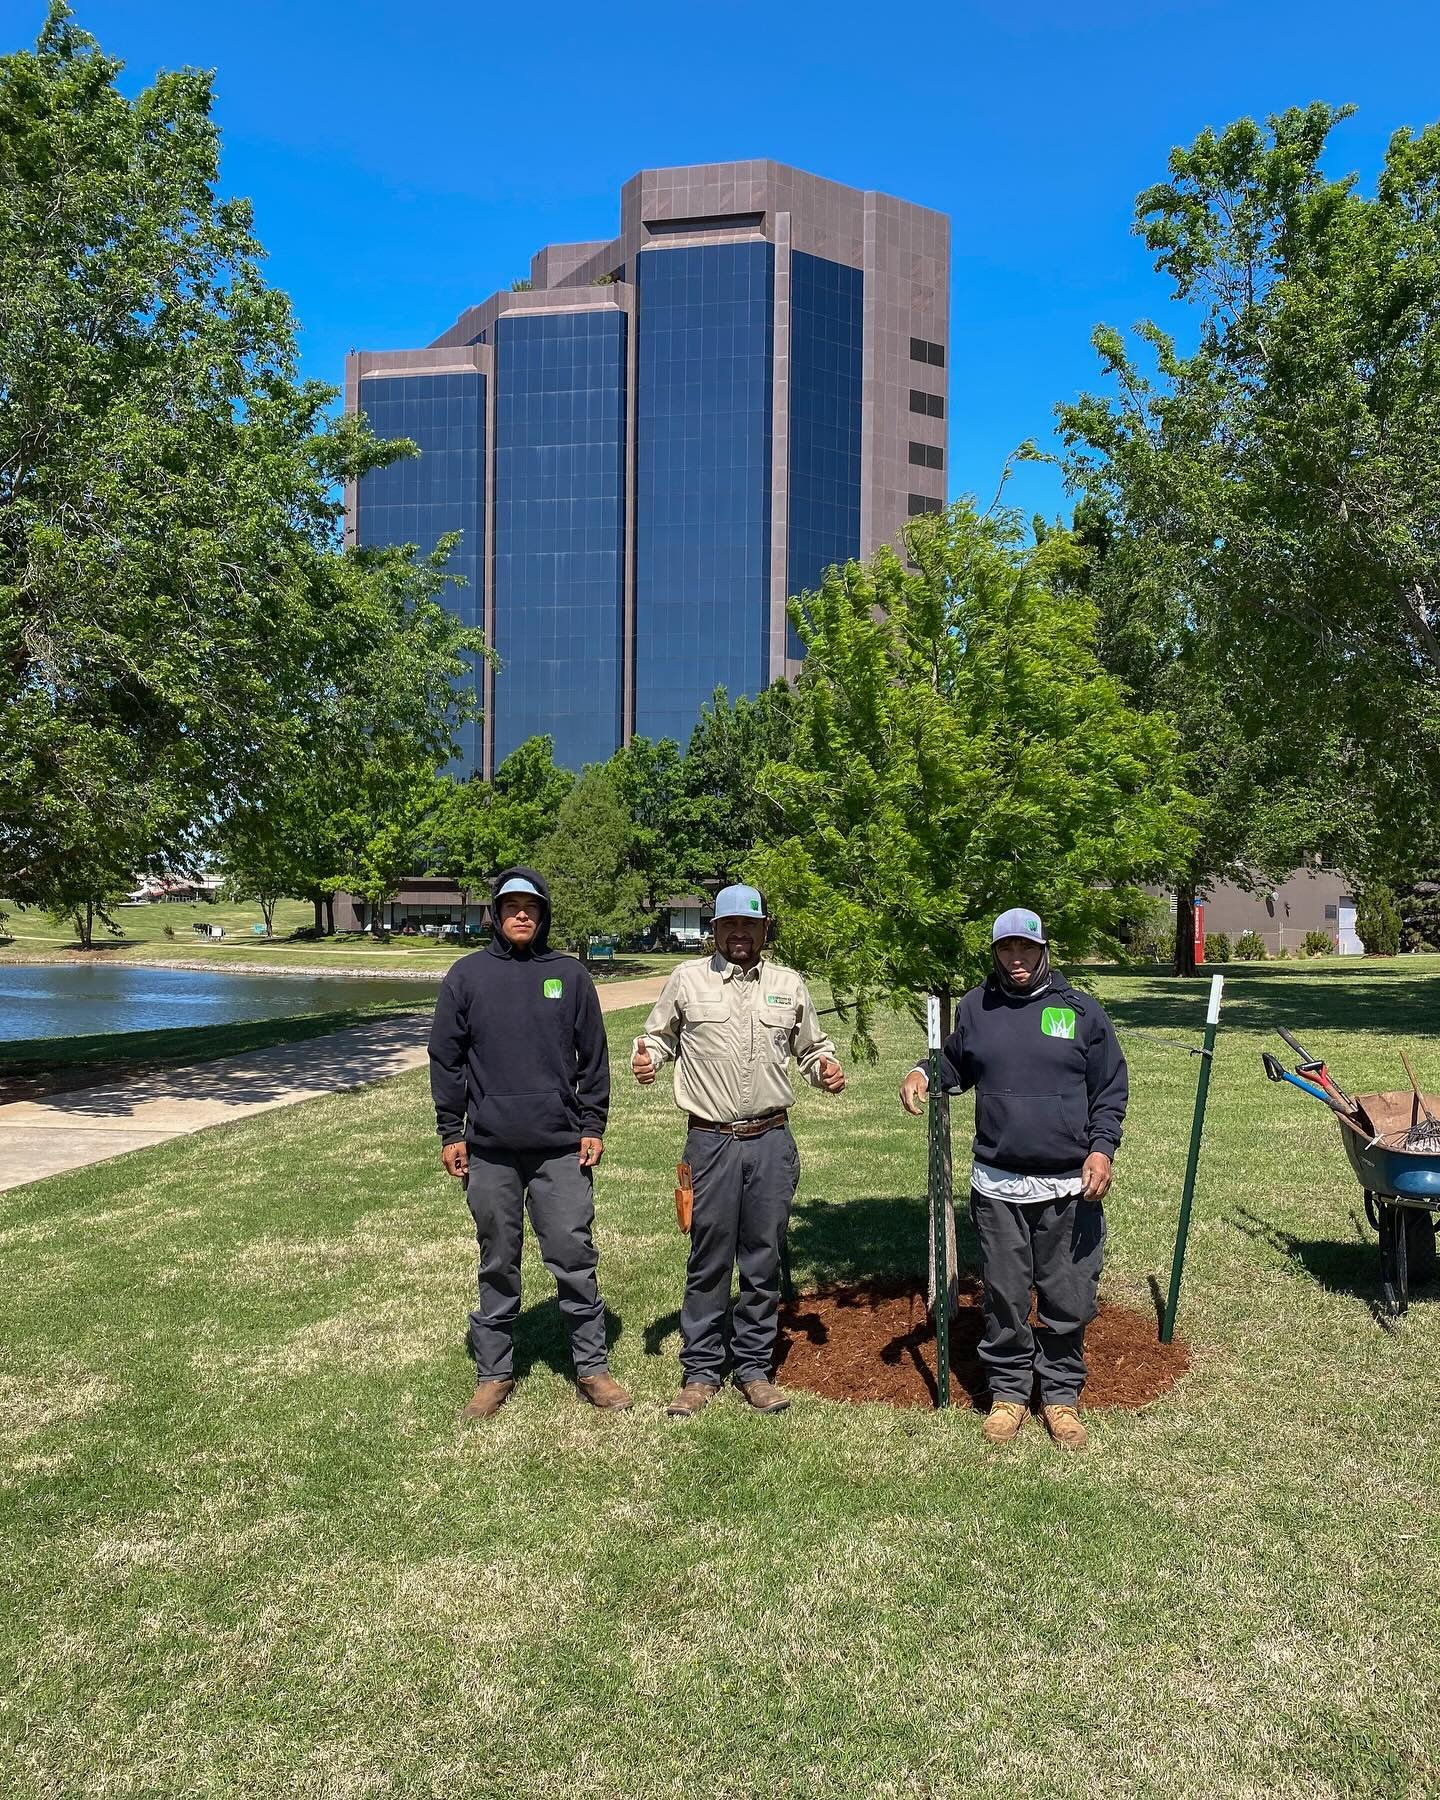 Happy Earth Day from all of us at Squared Away Lawns!  Today, we had the honor of planting a bald cypress at @amfidelity headquarters during their Earth Day celebration. 

As they delivered a speech, we added a little more green to our beautiful plan